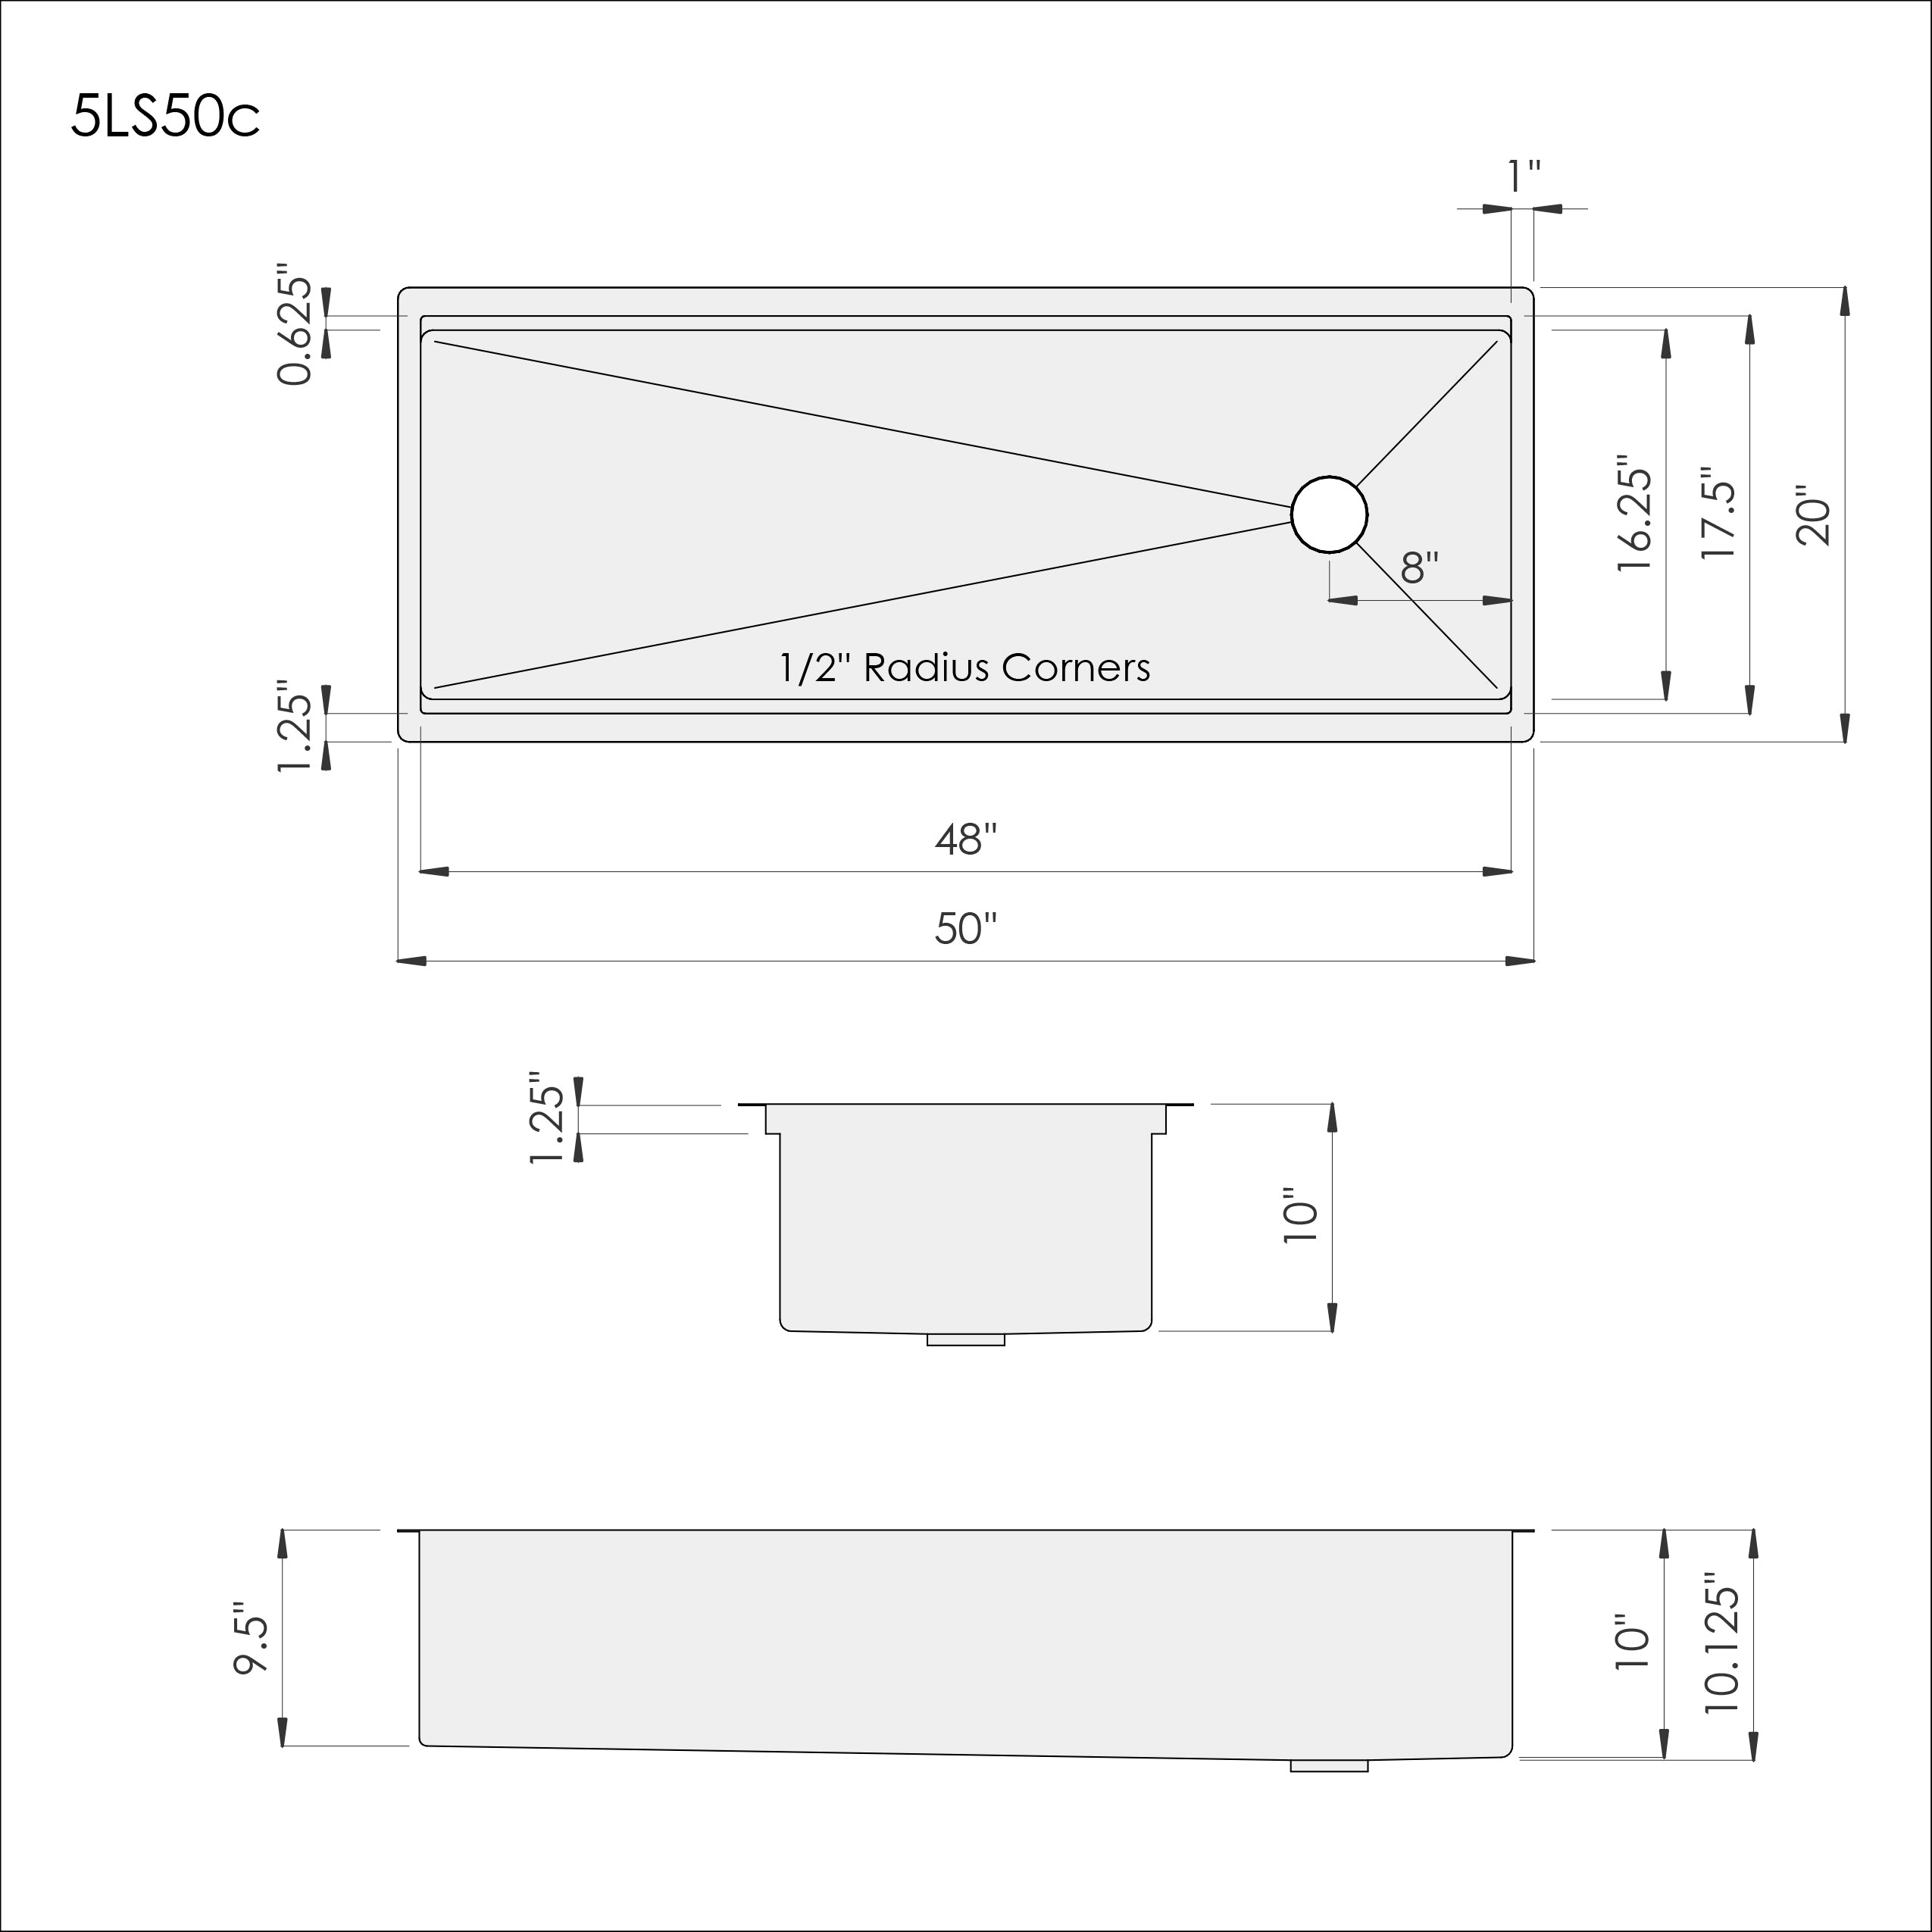 Dimensions of Create Good Sinks 50 inch stainless steel undermount workstation kitchen sink. Single bowl, one basin, with offset reversible drain. Double ledge compatible for dual tier sink use